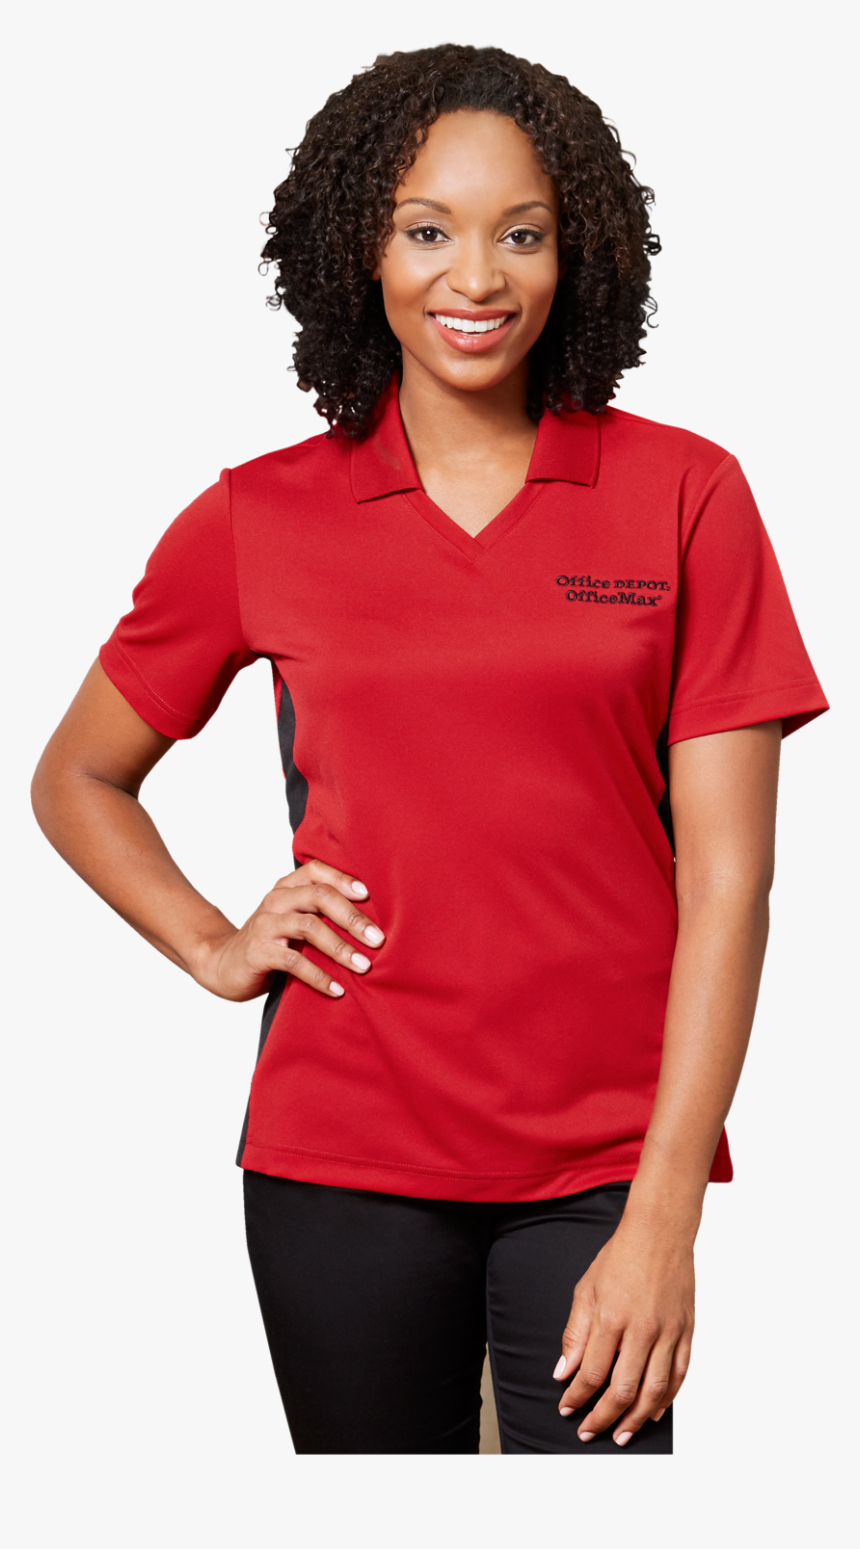 Office Depot Employee, HD Png Download, Free Download